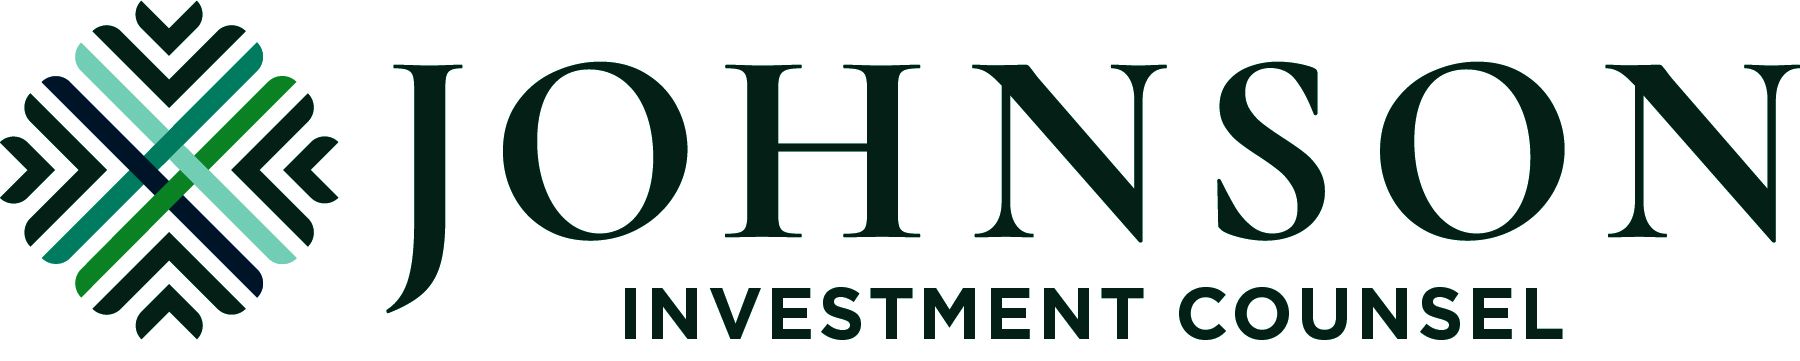 Johnson Investment Council